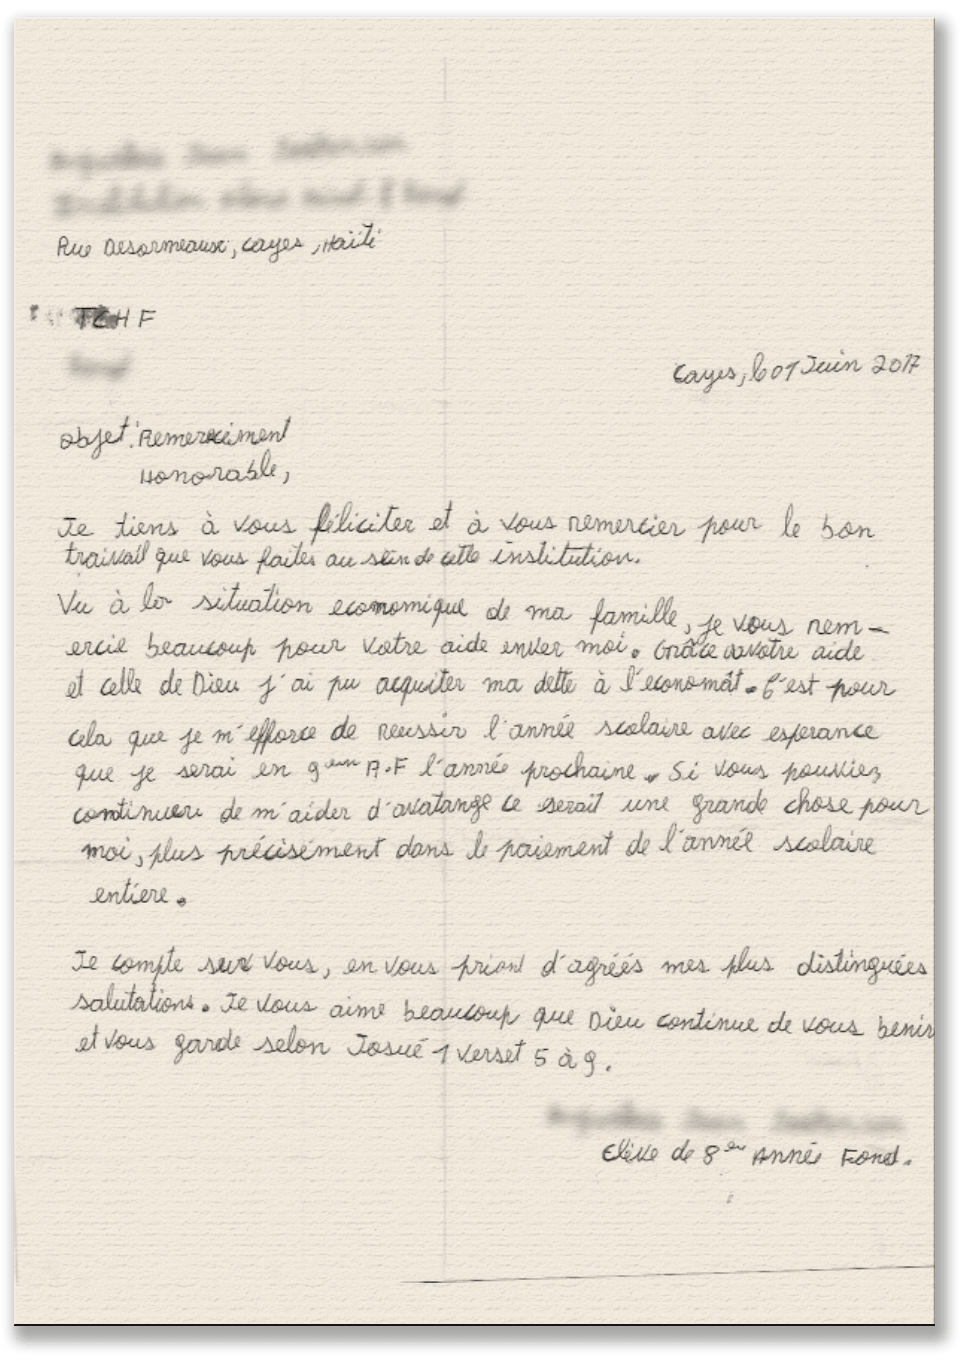 Letters from Students - The Children Heritage Foundation (tCHF)